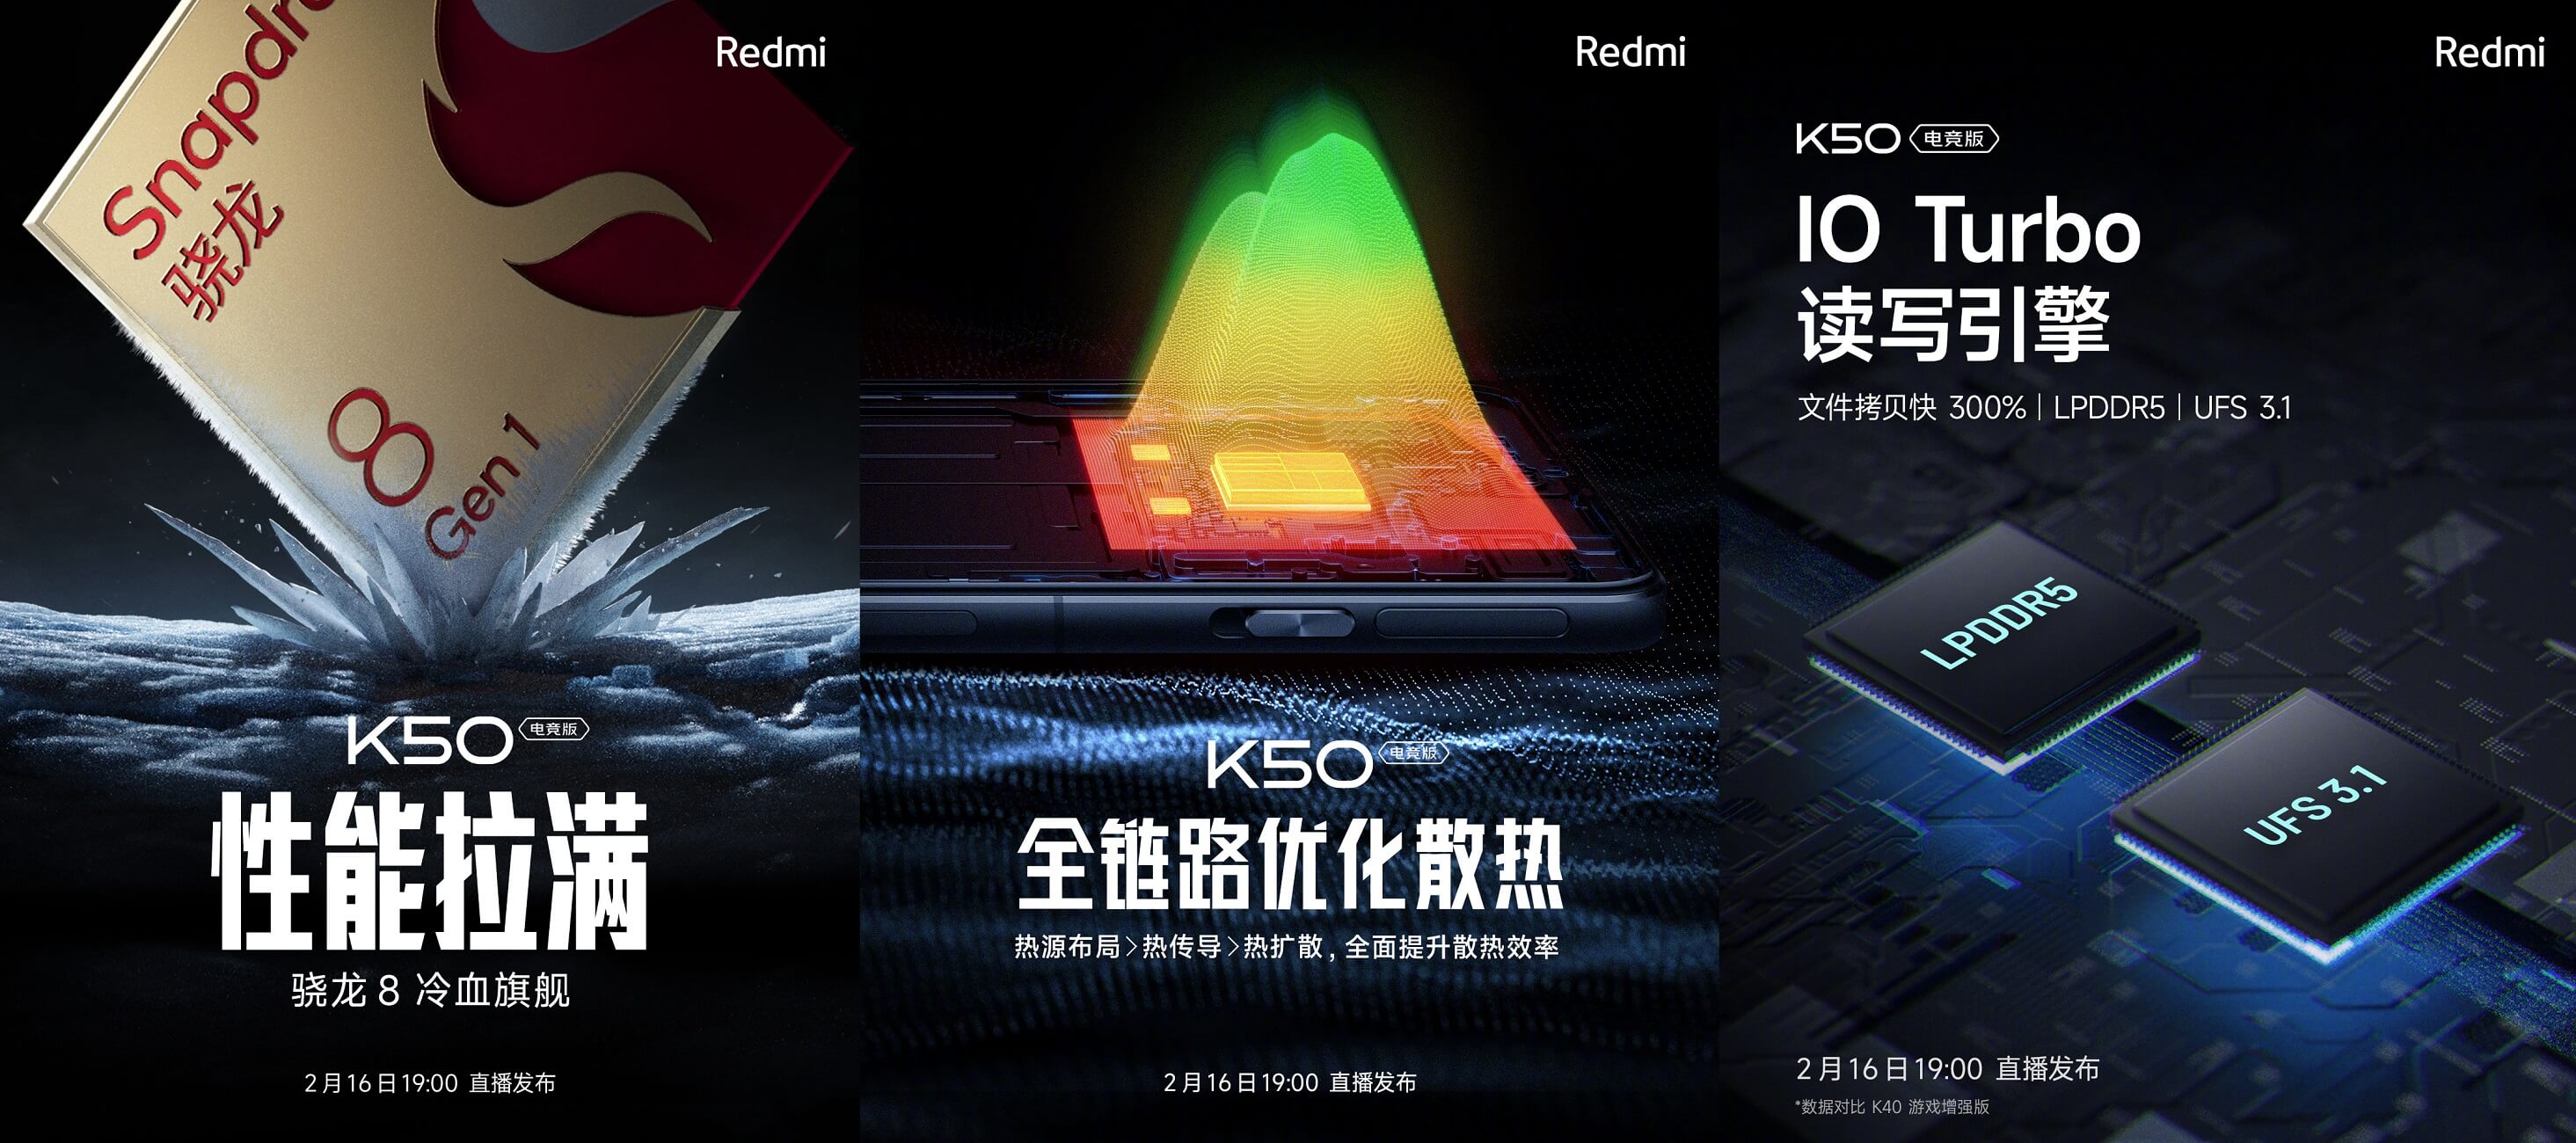 Redmi K50 gaming edition features